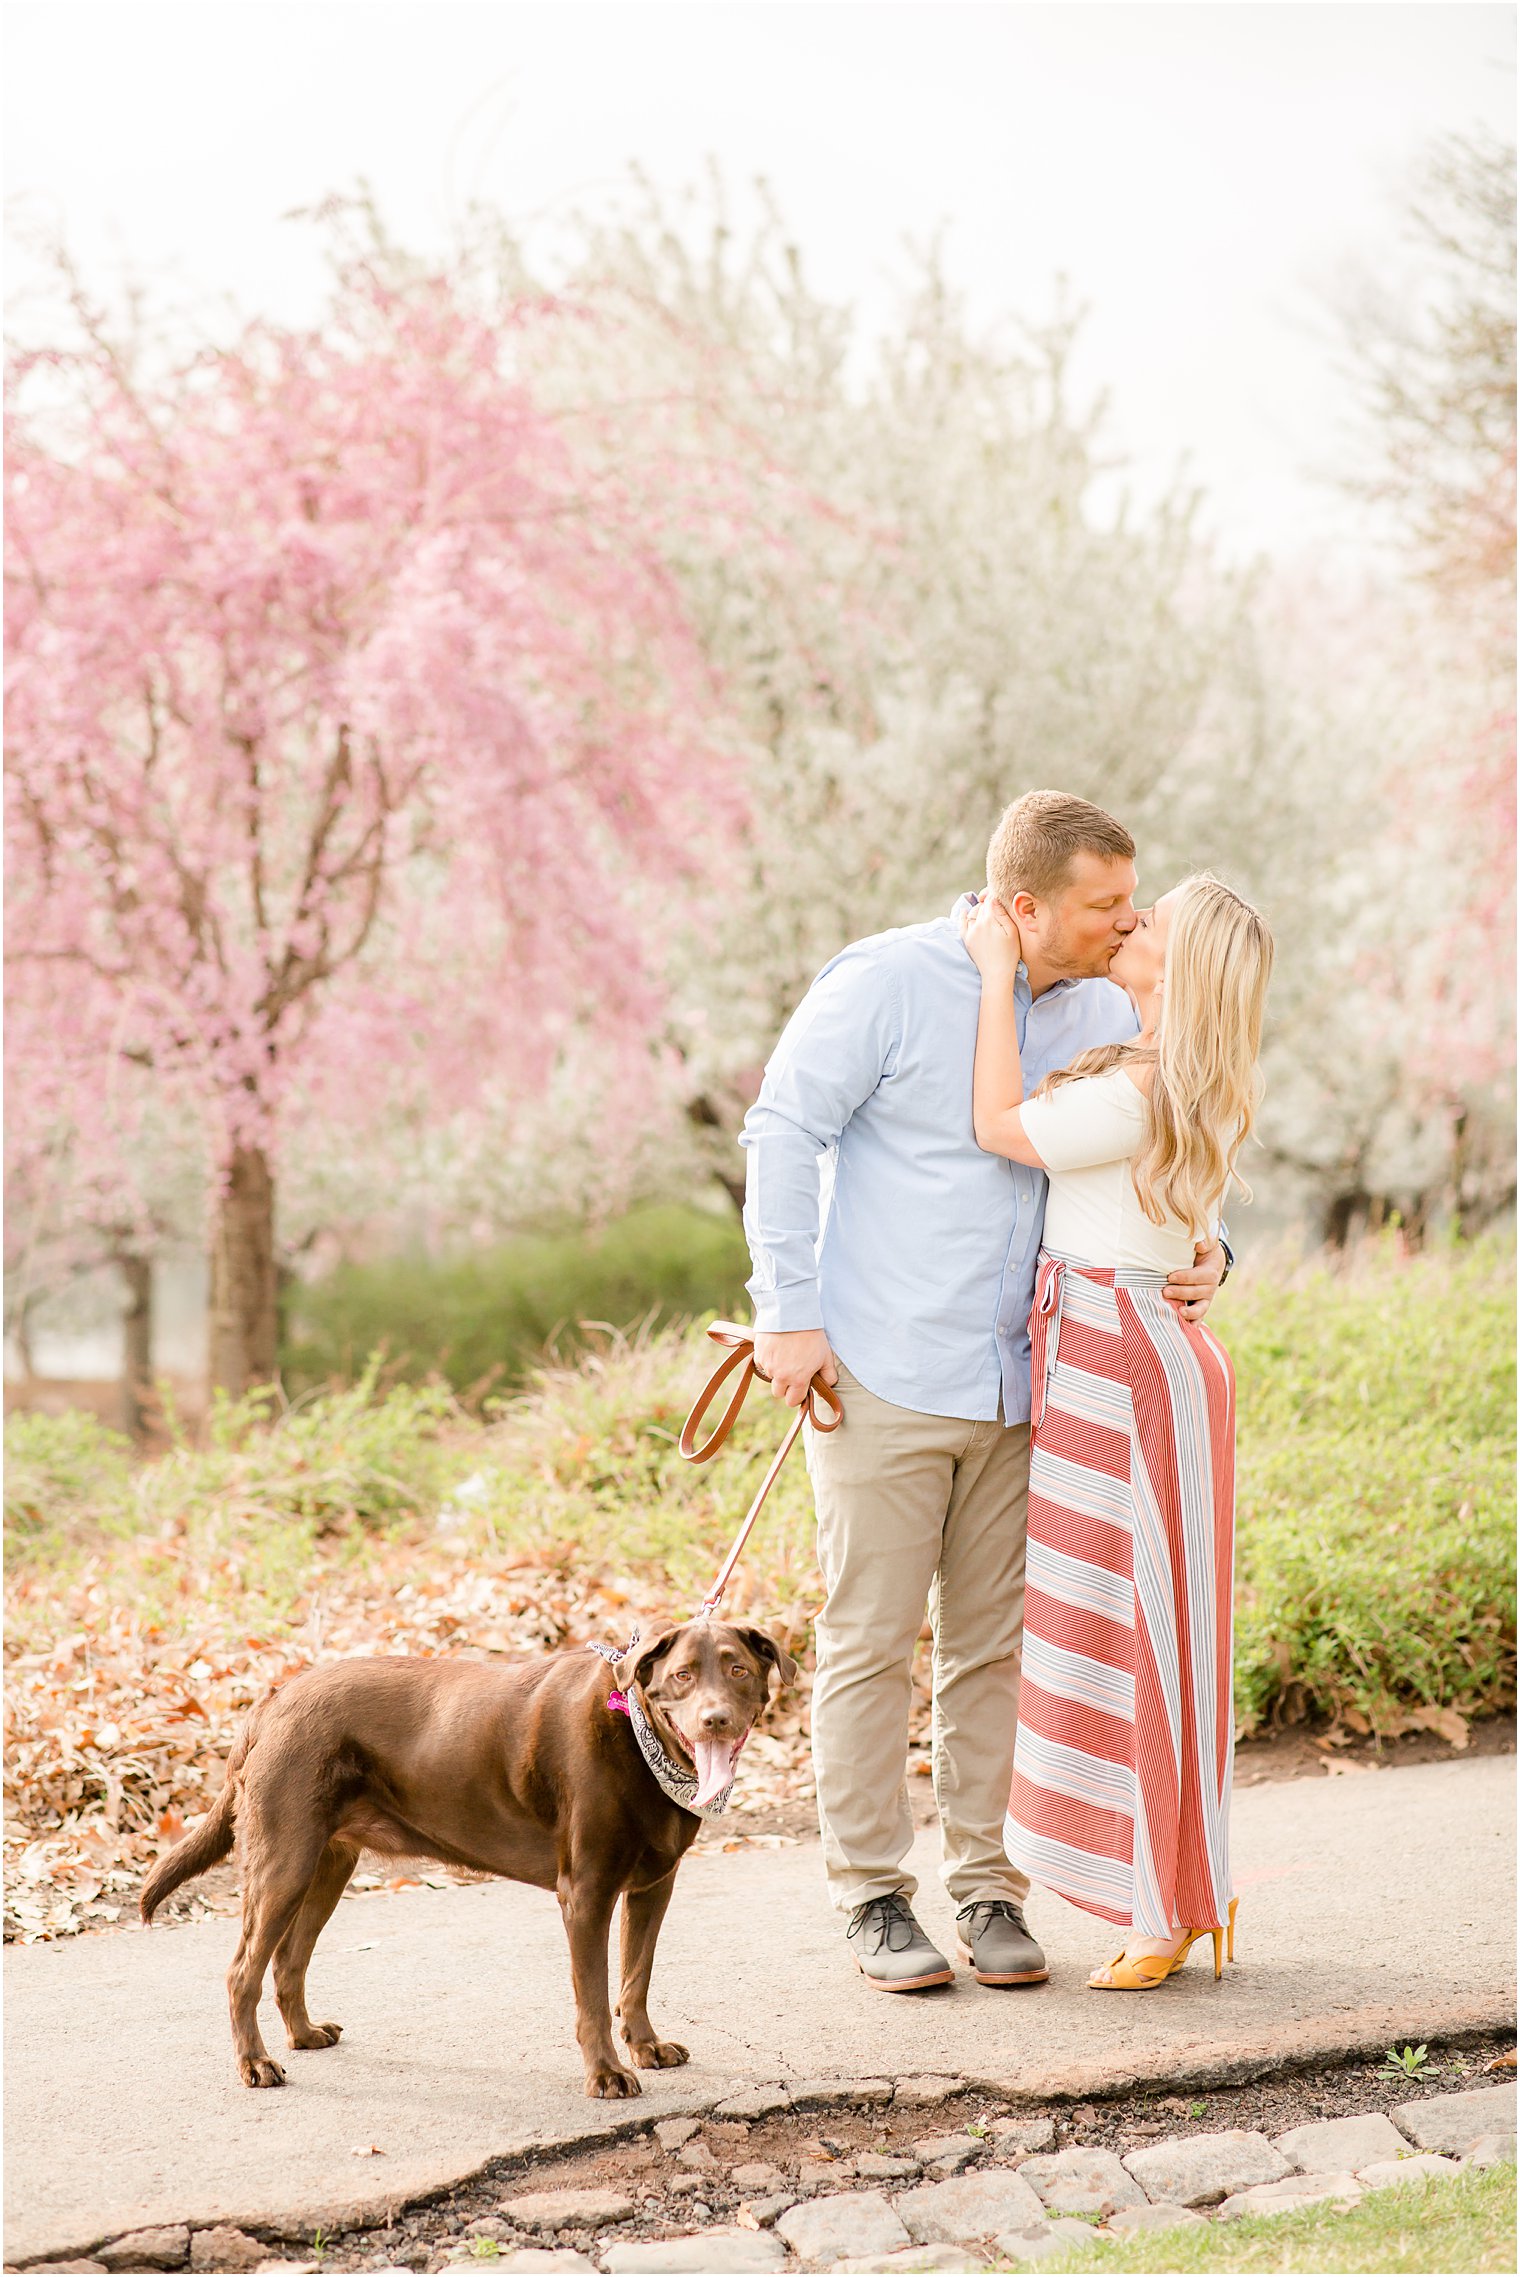 Spring Cherry Blossom Engagement session photos at Branch Brook Park by Idalia Photography